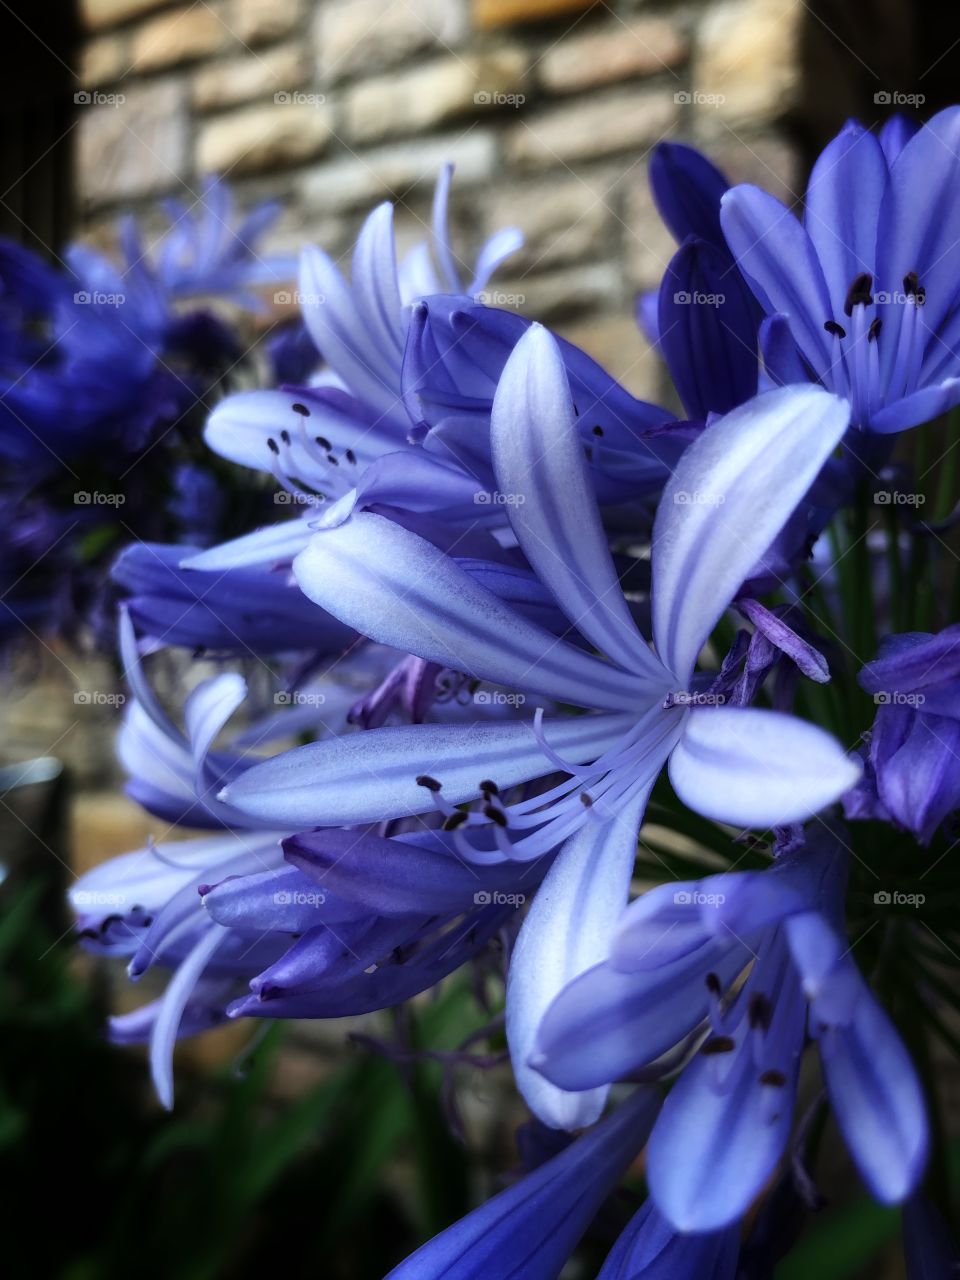 Agapanthus, from Greek: love (agape) and flower (anthus). Also known as Lily of the Nile. For a simple person who likes flowers, a very beautiful blue flower!